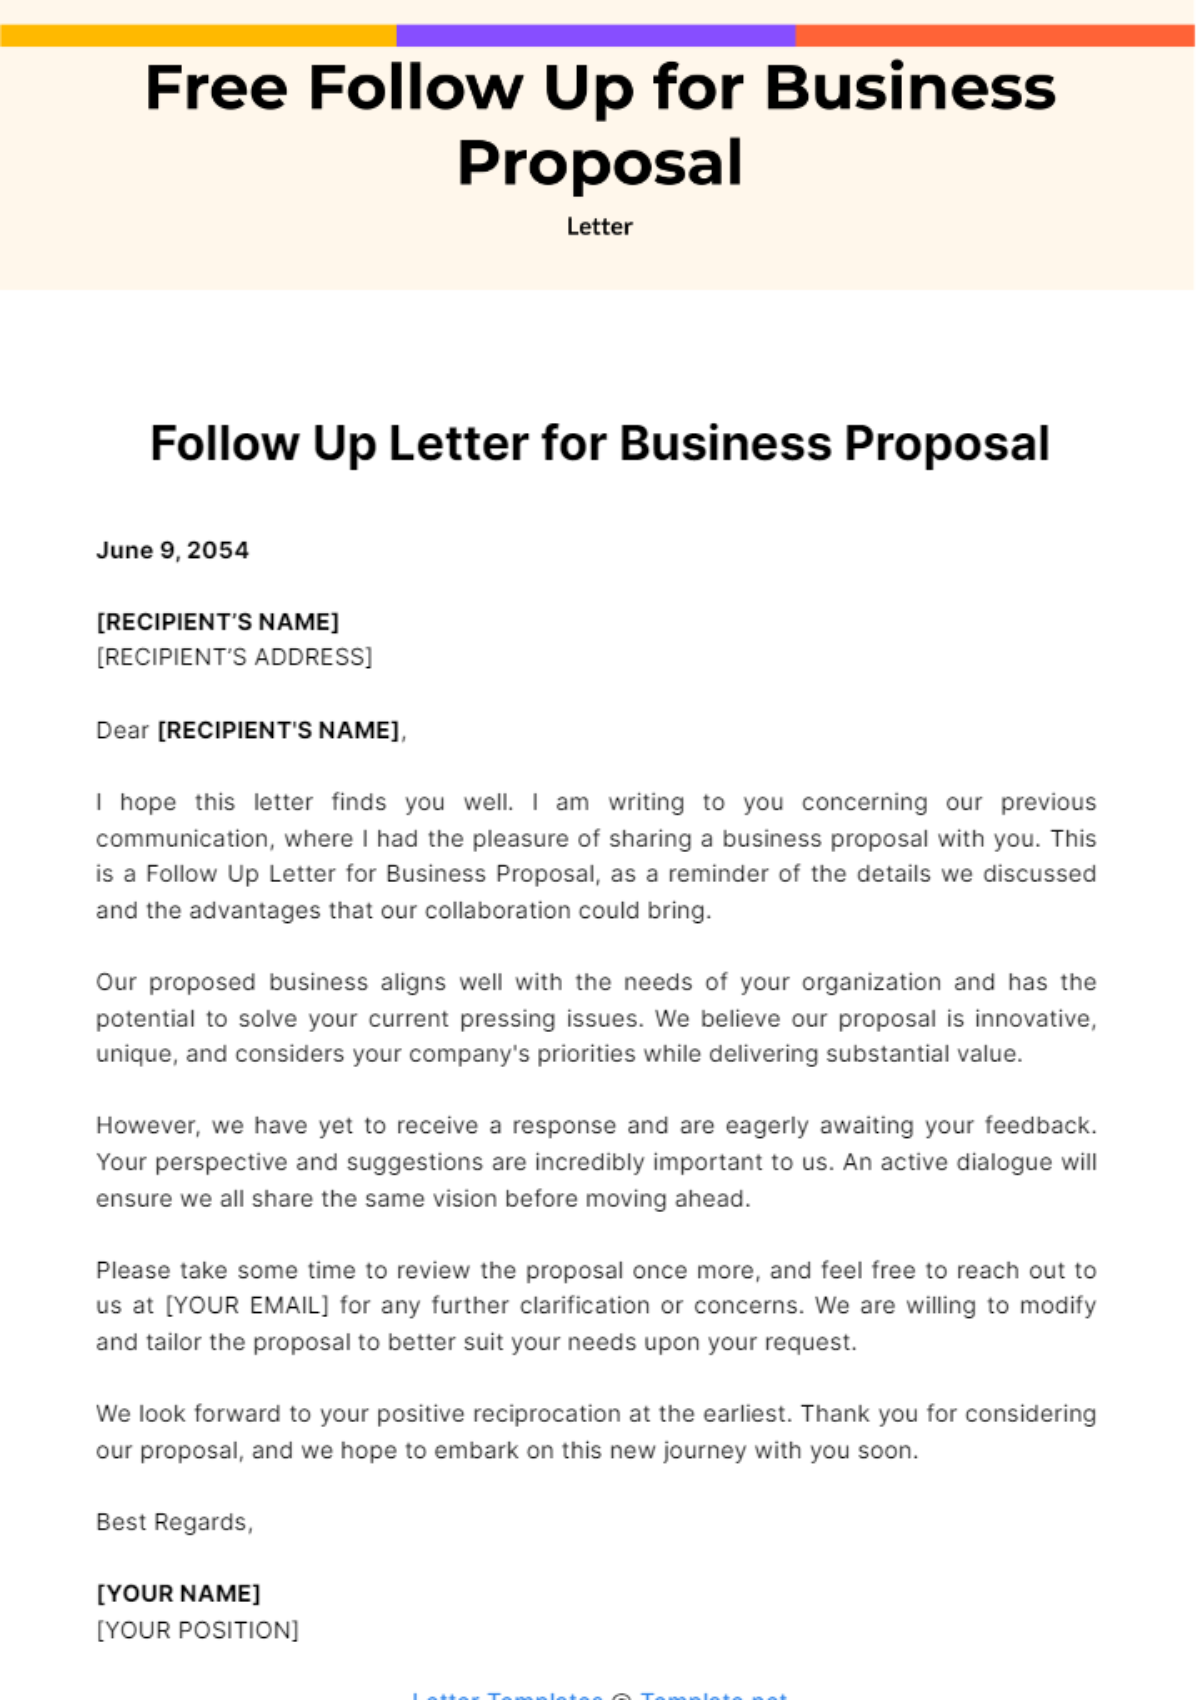 Free Follow Up Letter for Business Proposal Template